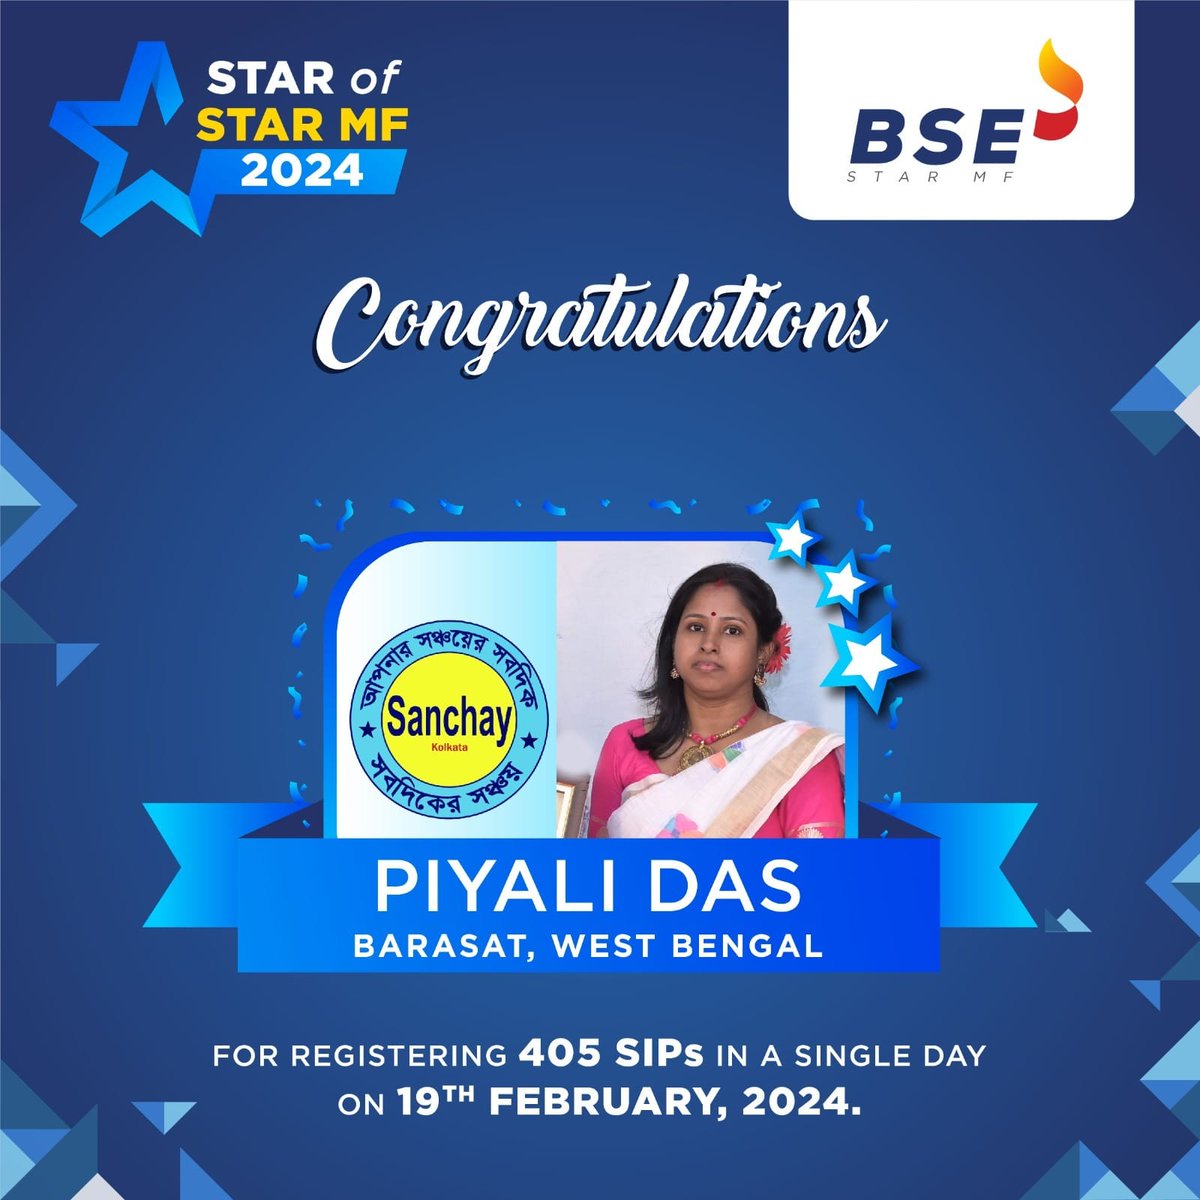 Kudos to Smt. Piyali Das from West Bengal! 2nd successful successful SIP drive this FY & 405 SIPs registered in a day. #SIPchampion @BSEIndia @SameerPatil2019 @ADS0210 @DebRanjanDas10 @JKetan5 @SandeepMoreBSE @cafemutual